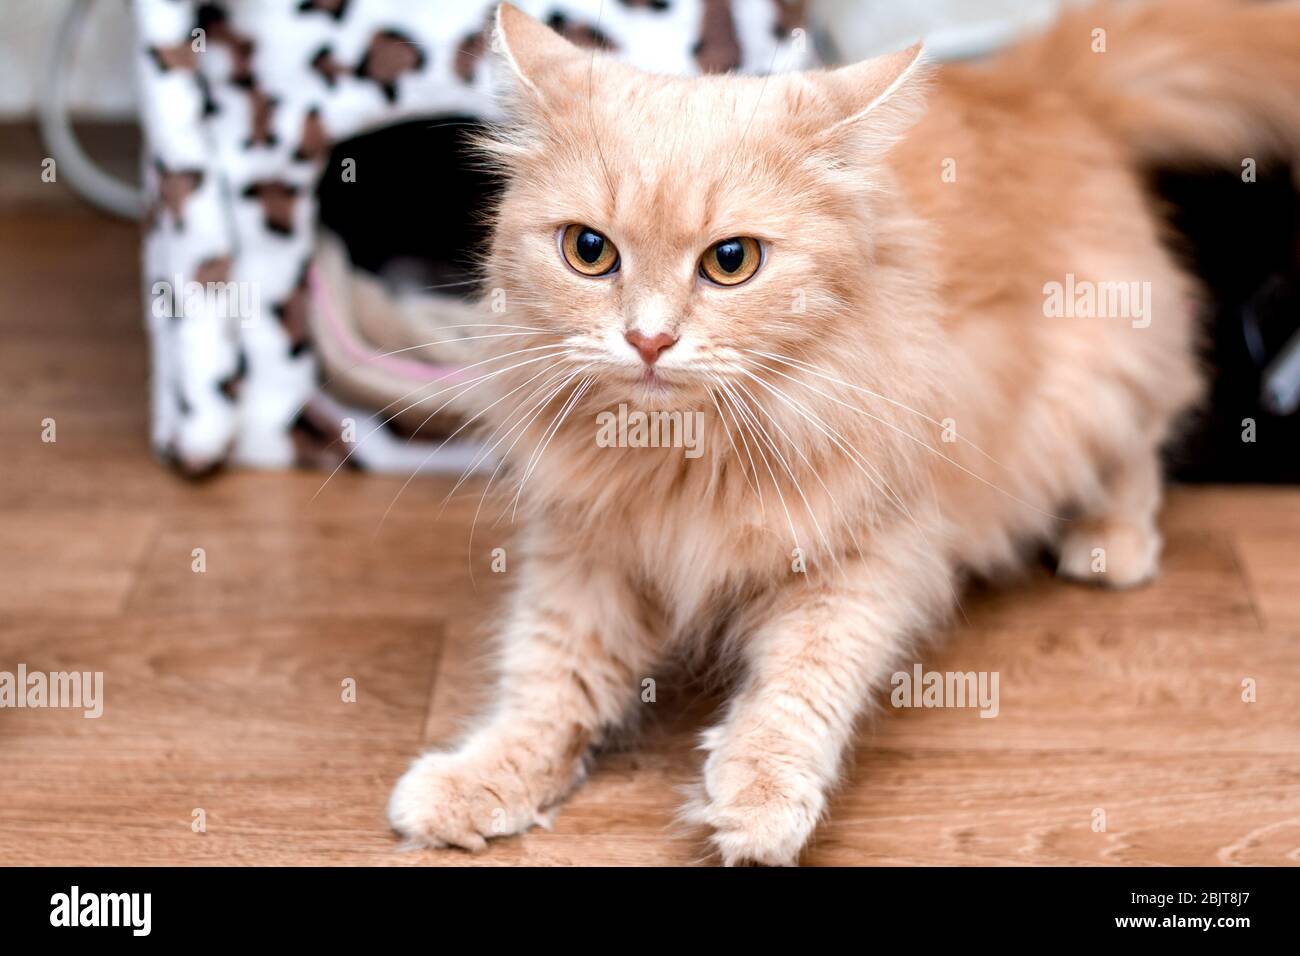 frightened red cat looks bulging eyes standing on its hind legs Stock Photo